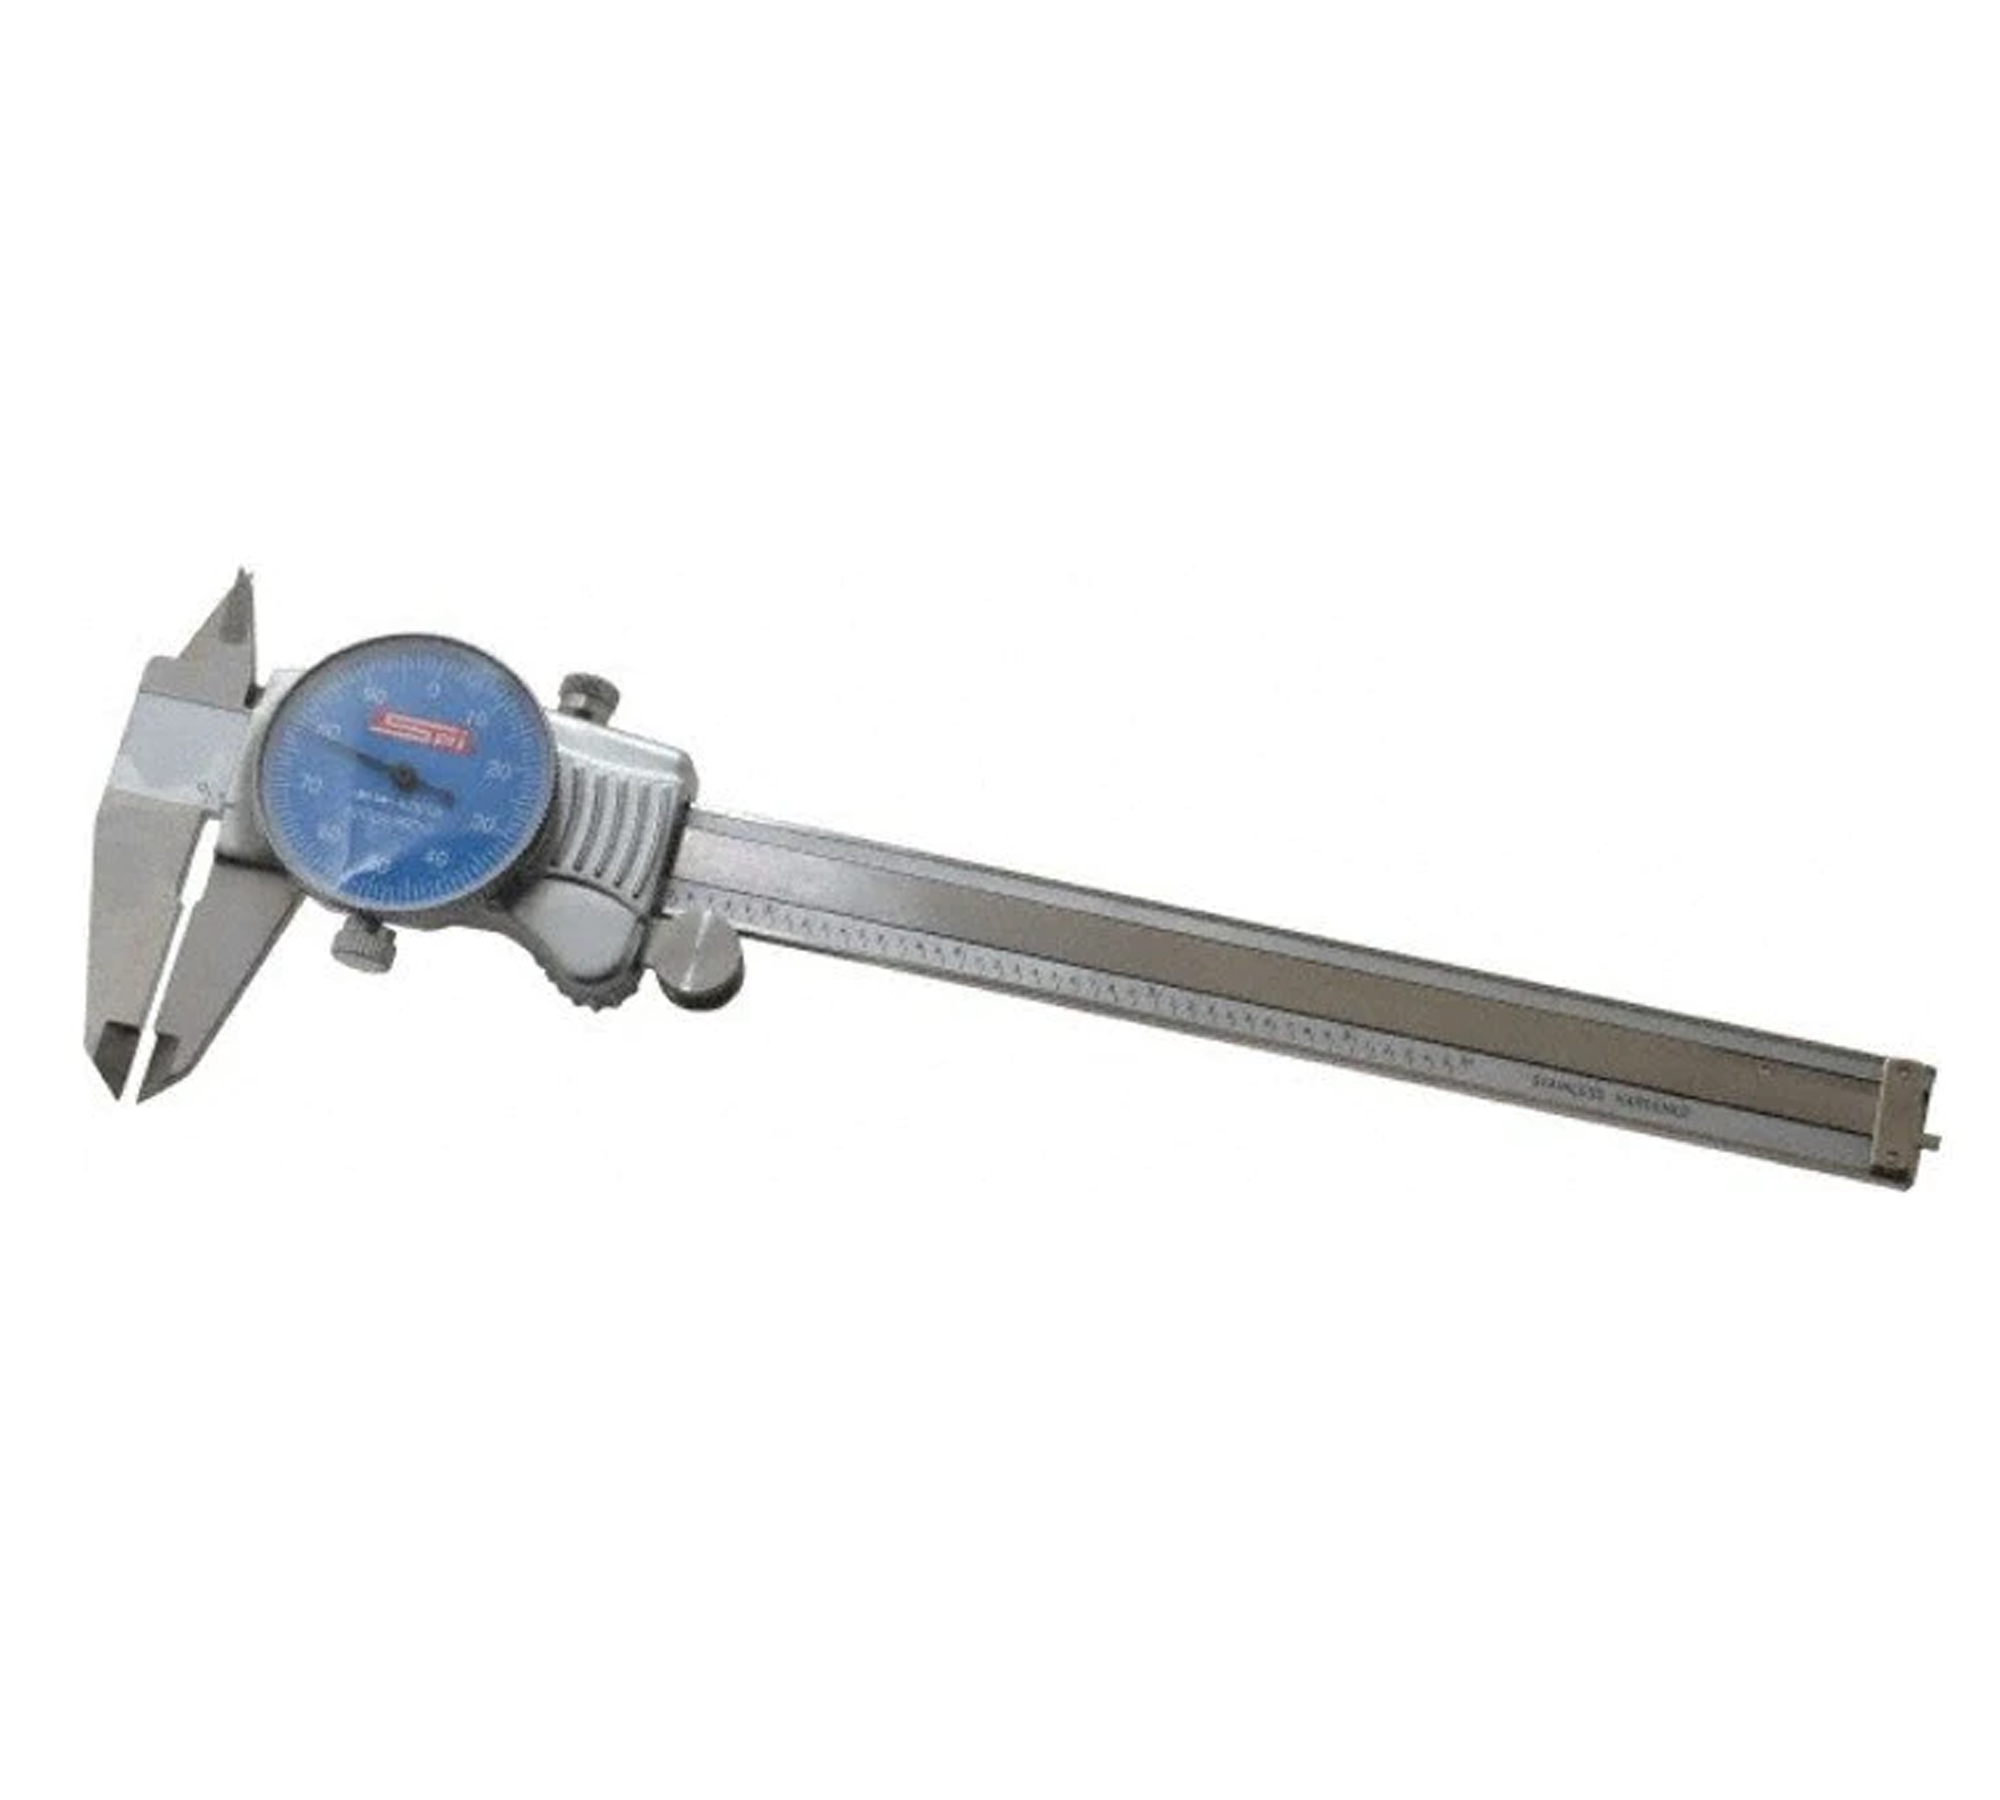 Shop Economy Dial Calipers at GreatGages.com